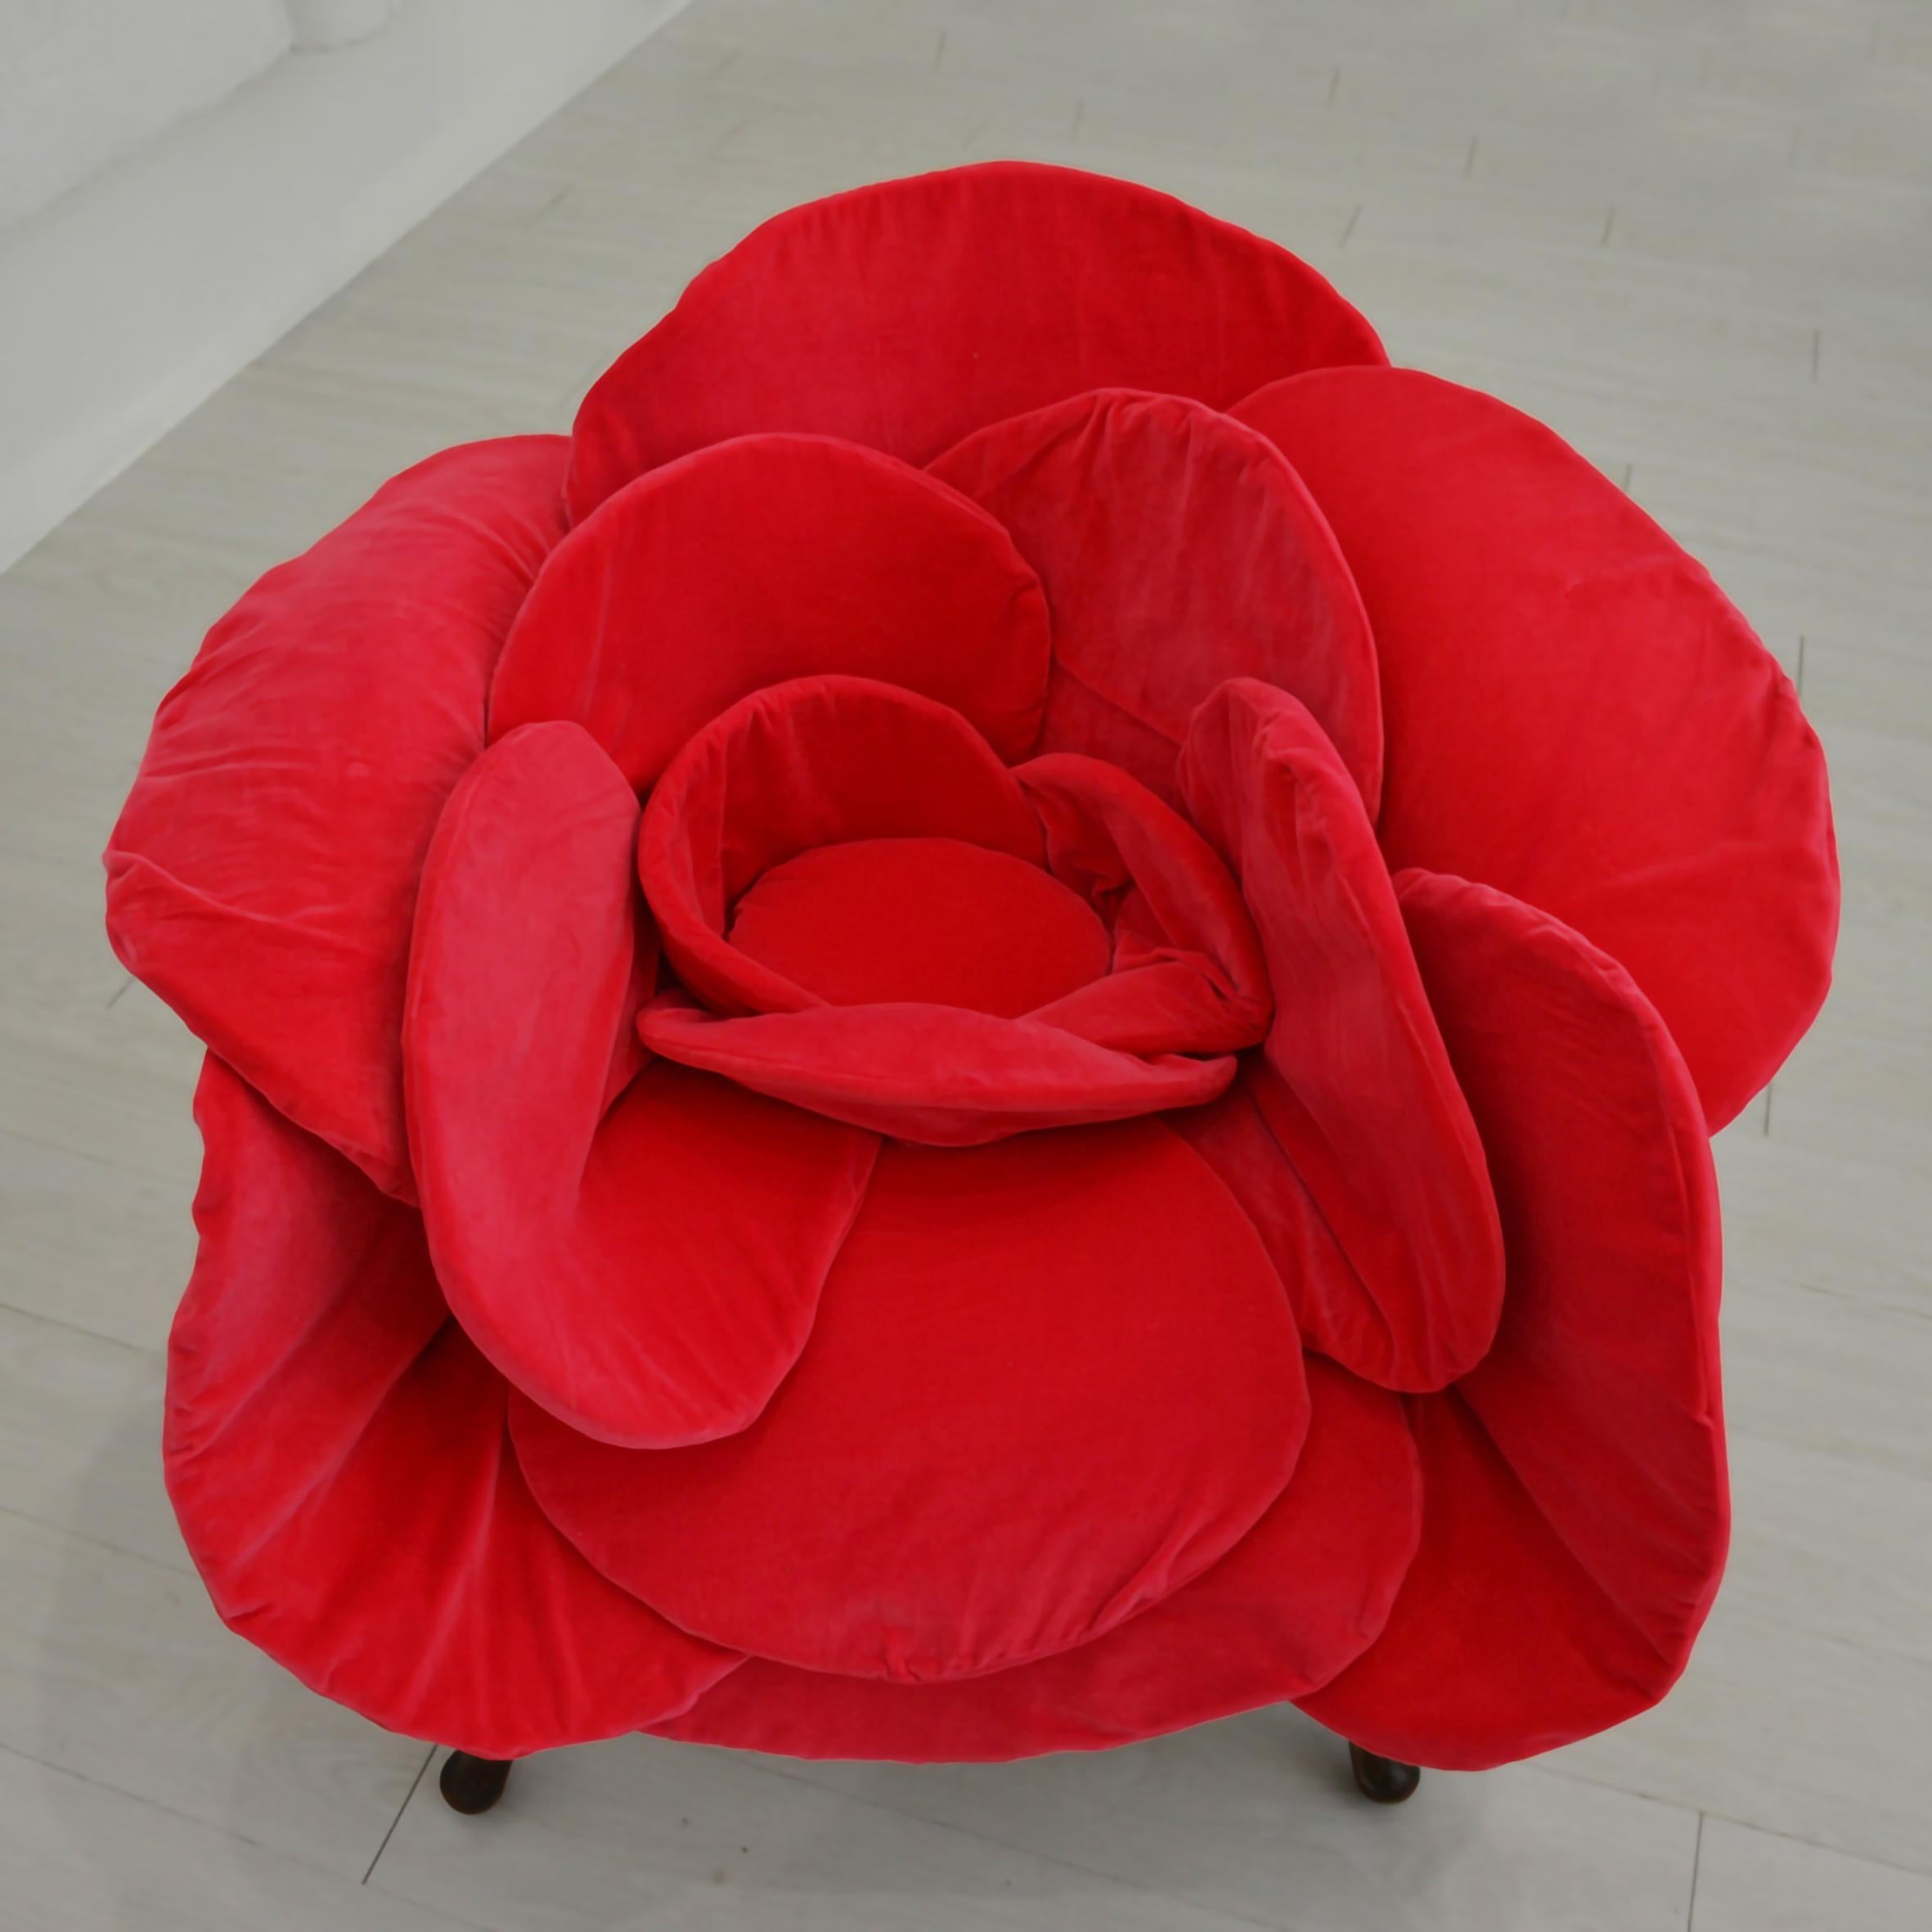 Sculpture. Unique piece hand made by the artist. 
Armchair decorated by the author. Pontoglio velvet rose, trimmings.